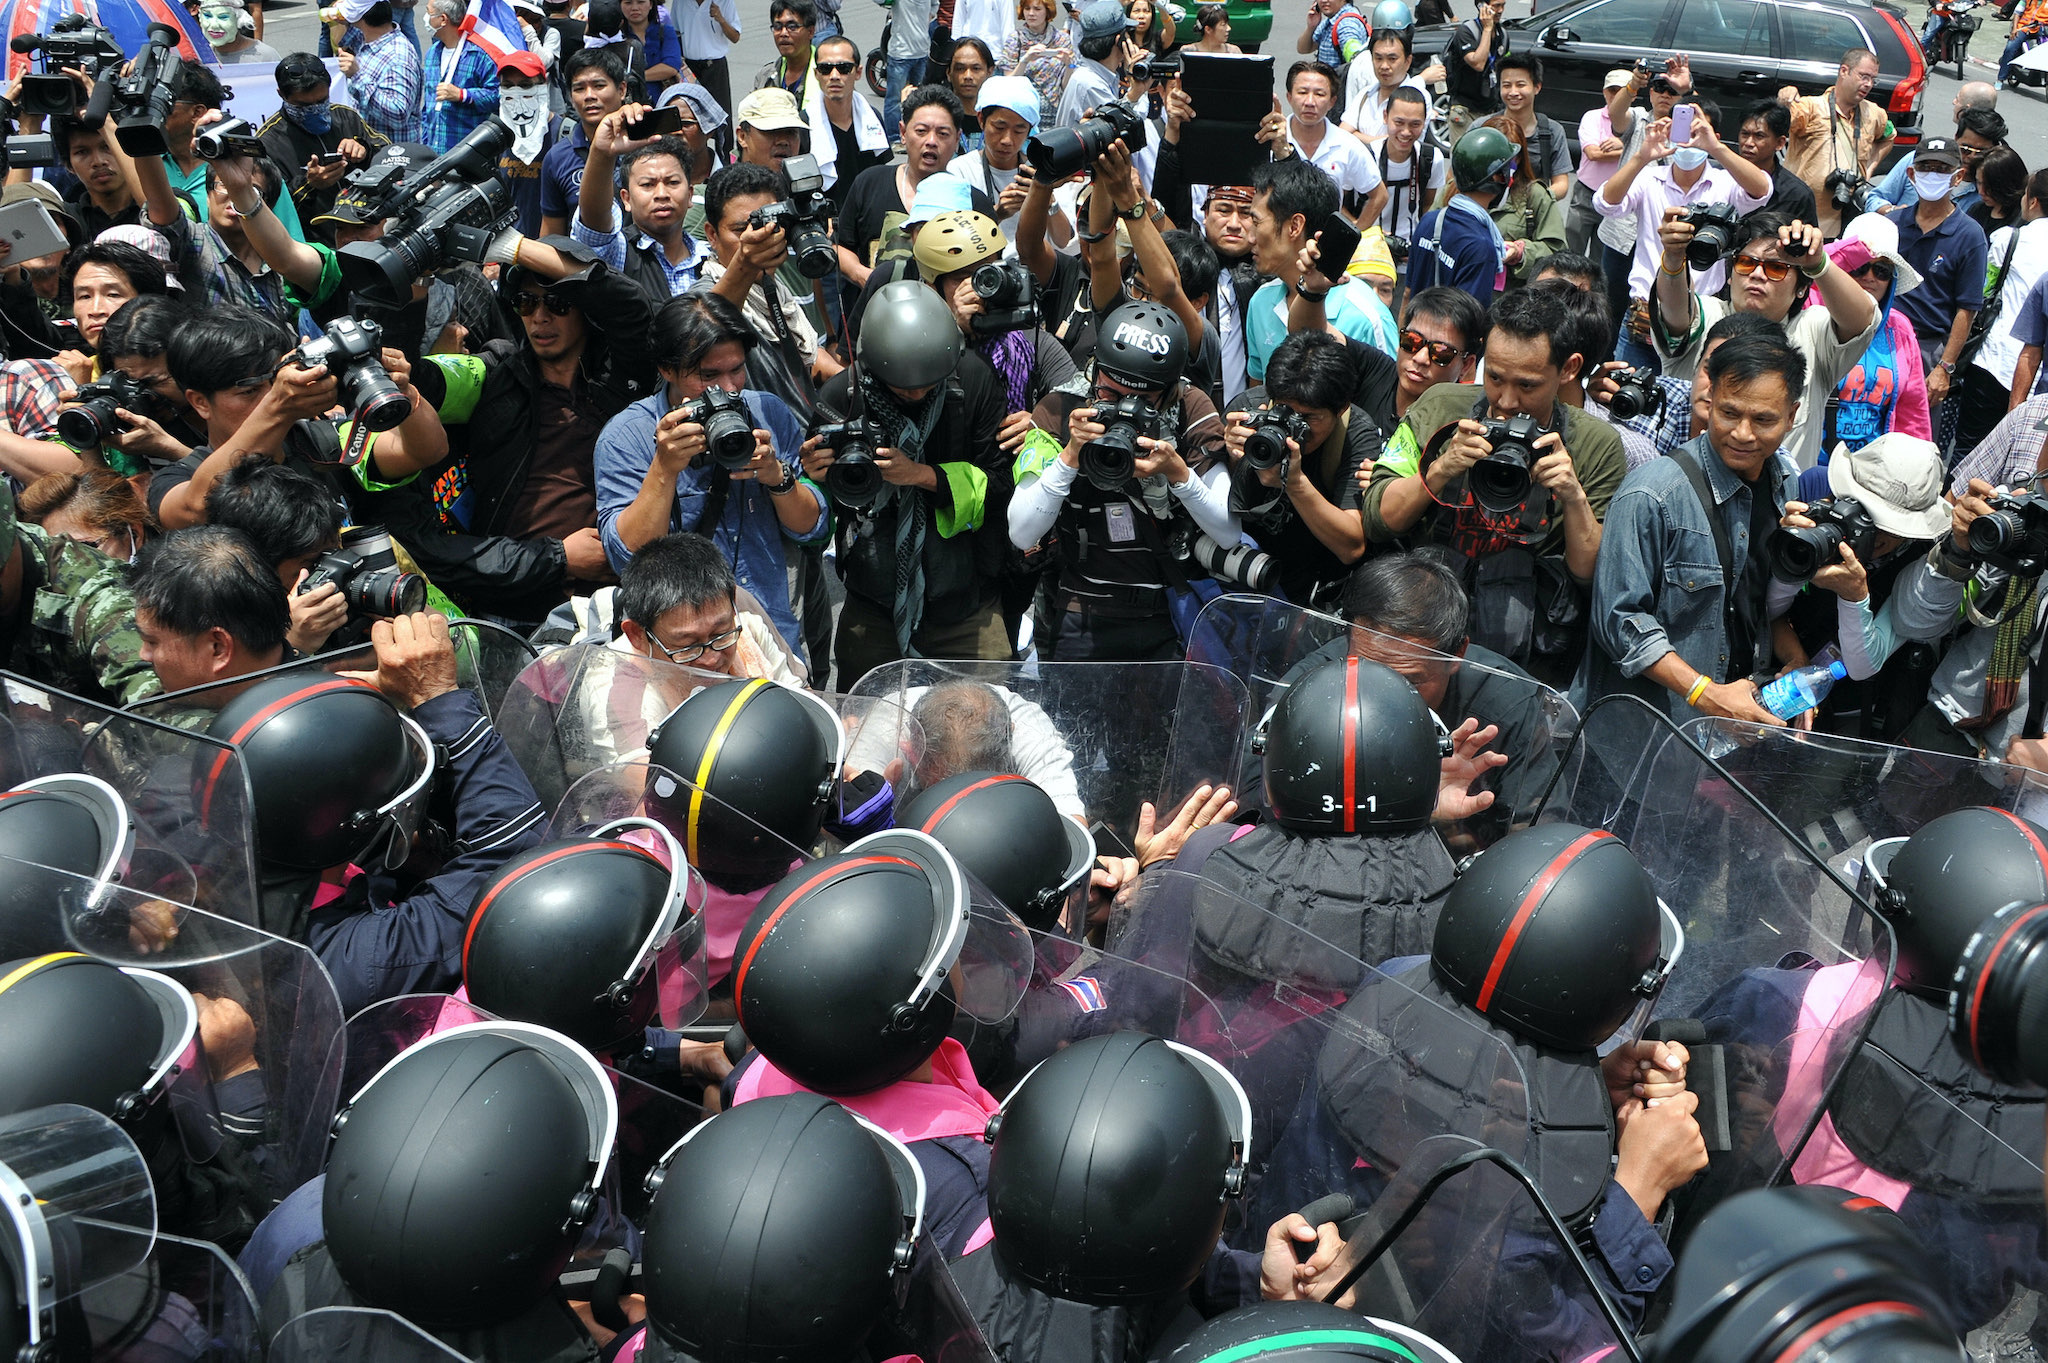 Protesters confront riot police at a barricade near parliament during an anti-amnesty bill rally. Bangkok, Thailand, 07/08/2013. Around 2,500 protesters rallied in opposition to a controversial amnesty bill.